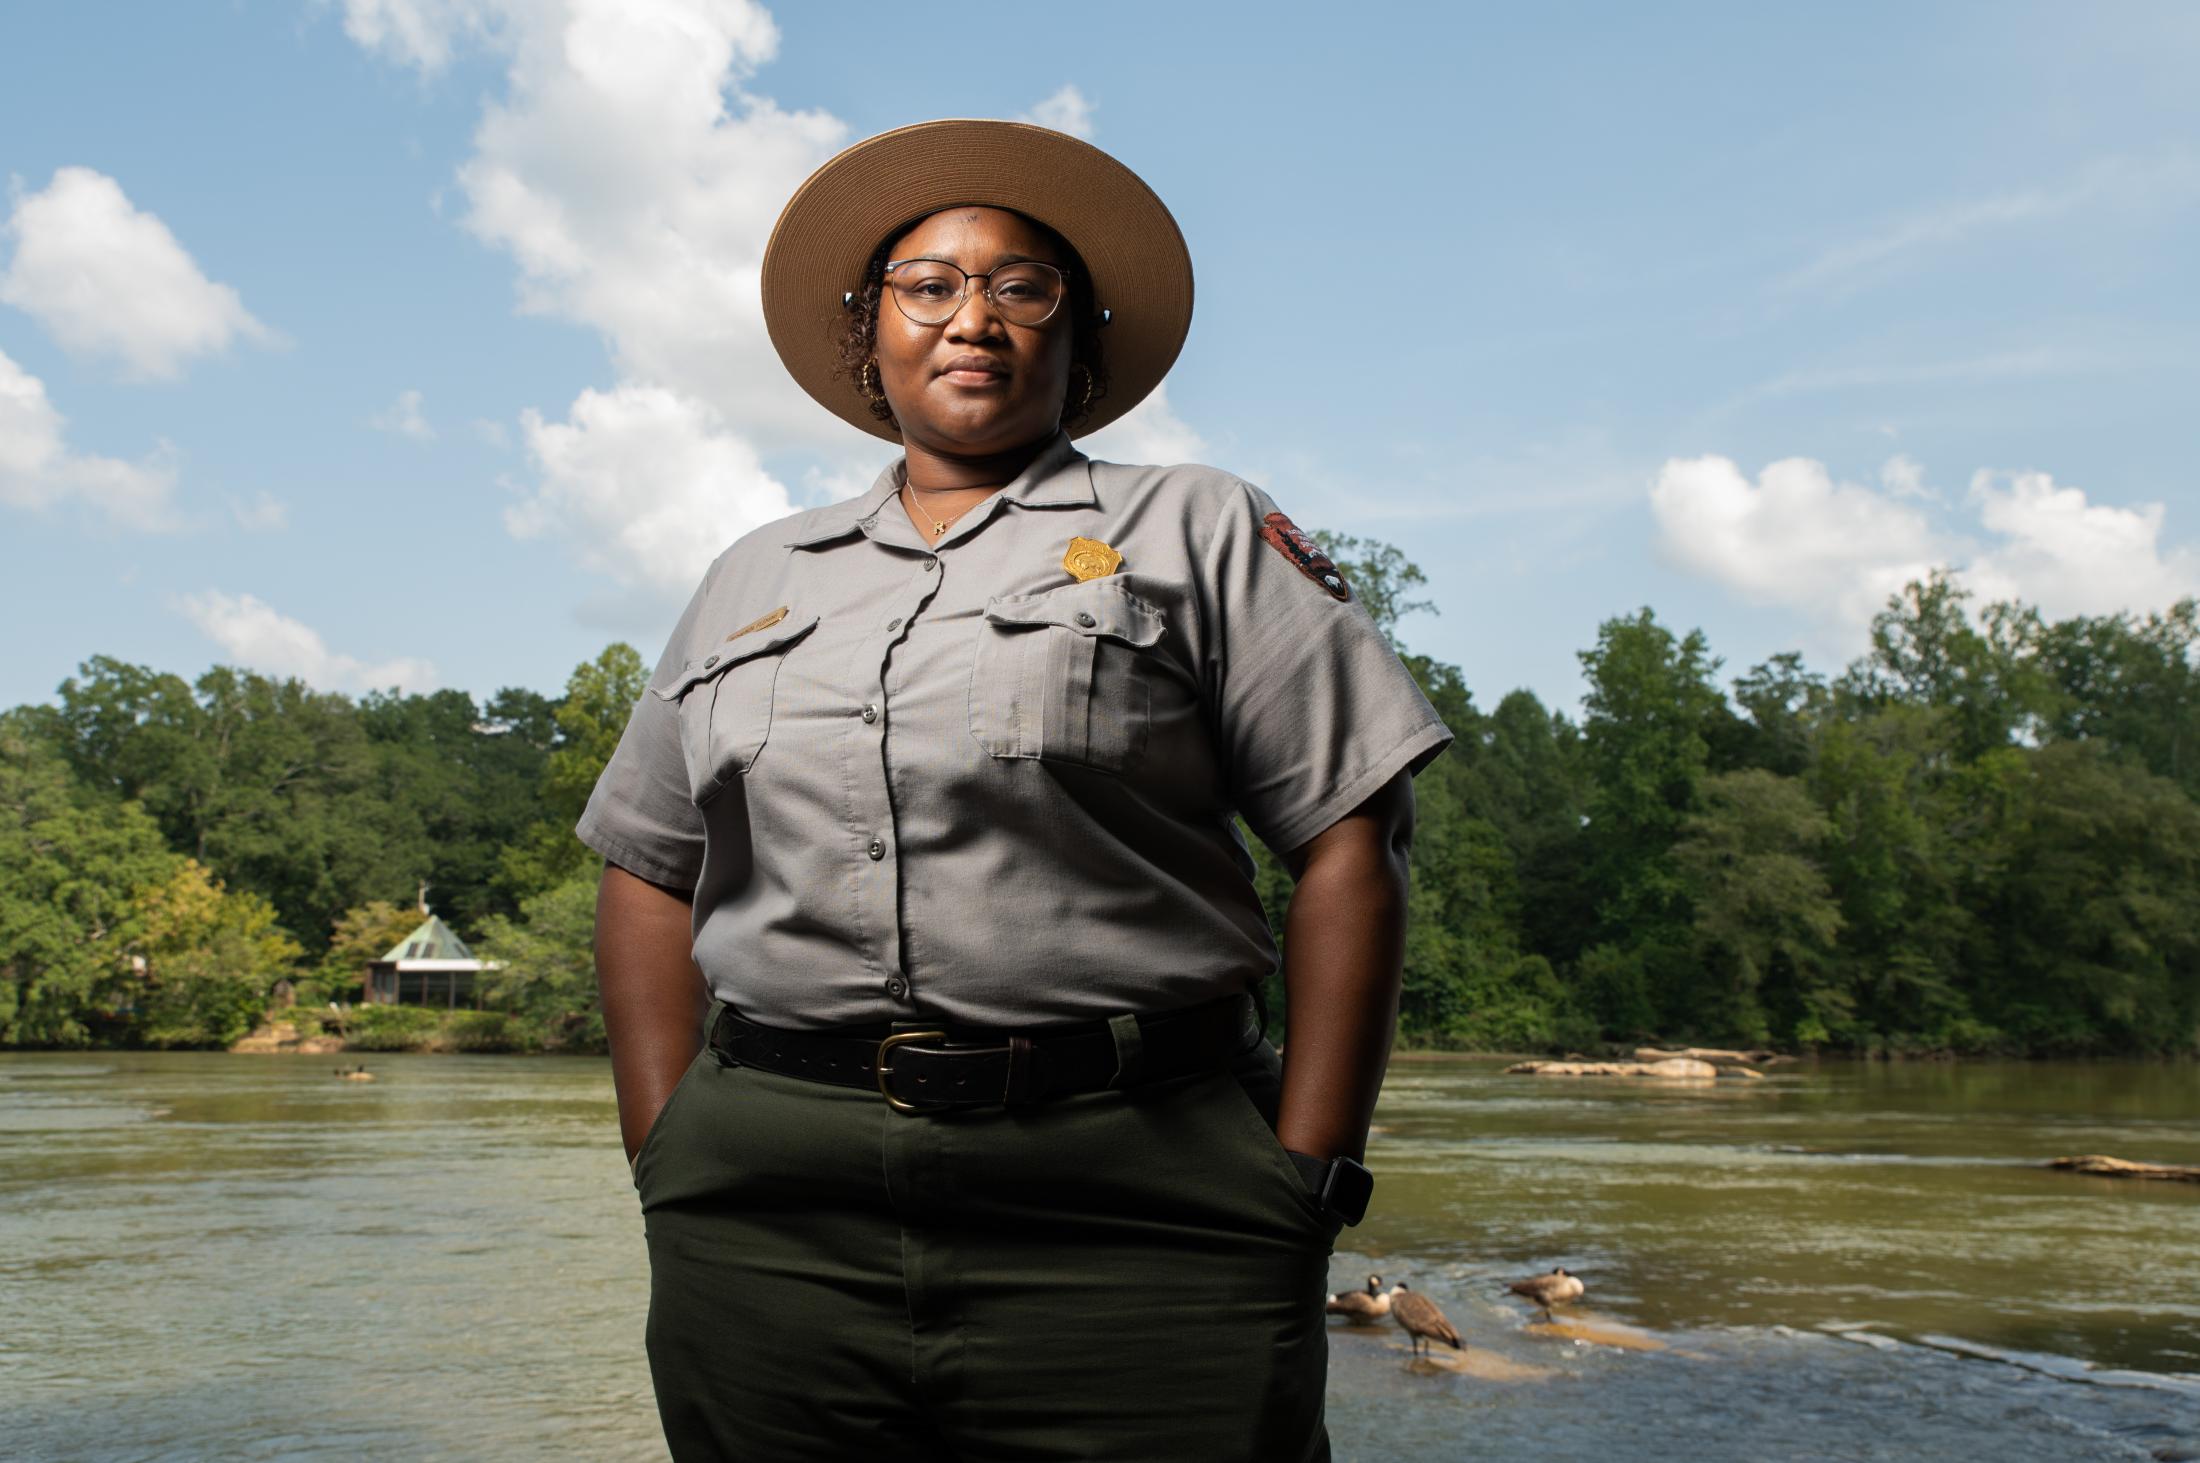  Rashaunda Fleming poses for a portrait at the Chattahoochee National Park Service headquarters. Working at the visitor center, Fleming sees people come to enjoy the park spanning 48 miles under Buford Dam. While the dam provides energy to families in metro Atlanta, dams can also exacerbate environmental damage by increasing water temperatures and encouraging invasive species, altering the natural ecosystem of the river. 